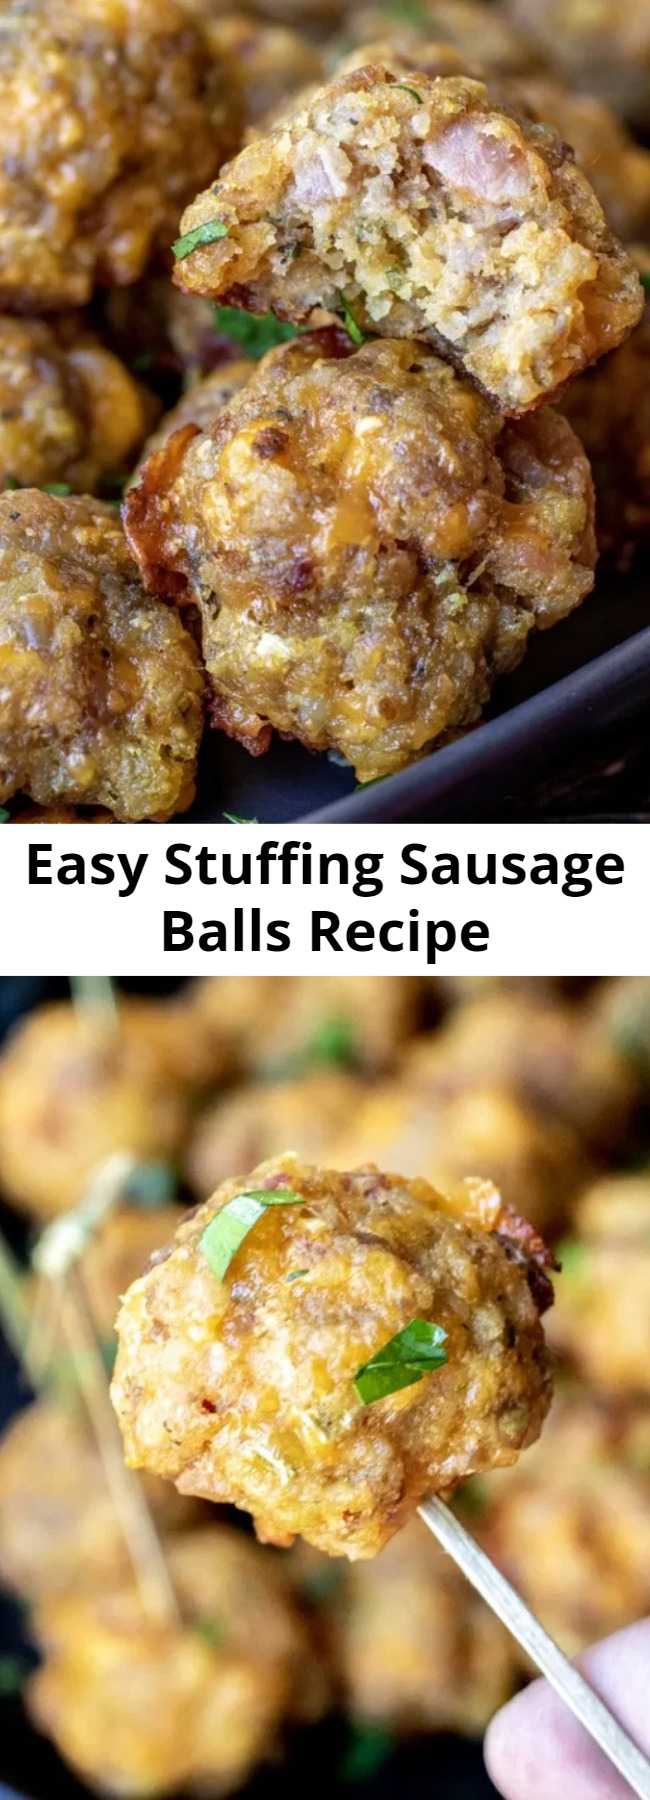 Easy Stuffing Sausage Balls Recipe - Stuffing Sausage Balls are an easy appetizer with all of the flavors of the holidays. Cheese, sausage, bacon, and stuffing are rolled together for one perfect bite! Perfect appetizer for Thanksgiving, Christmas, or New Year's Eve! #thanksgiving #appetizer #Christmas #Newyearseve #partyfood #sausage